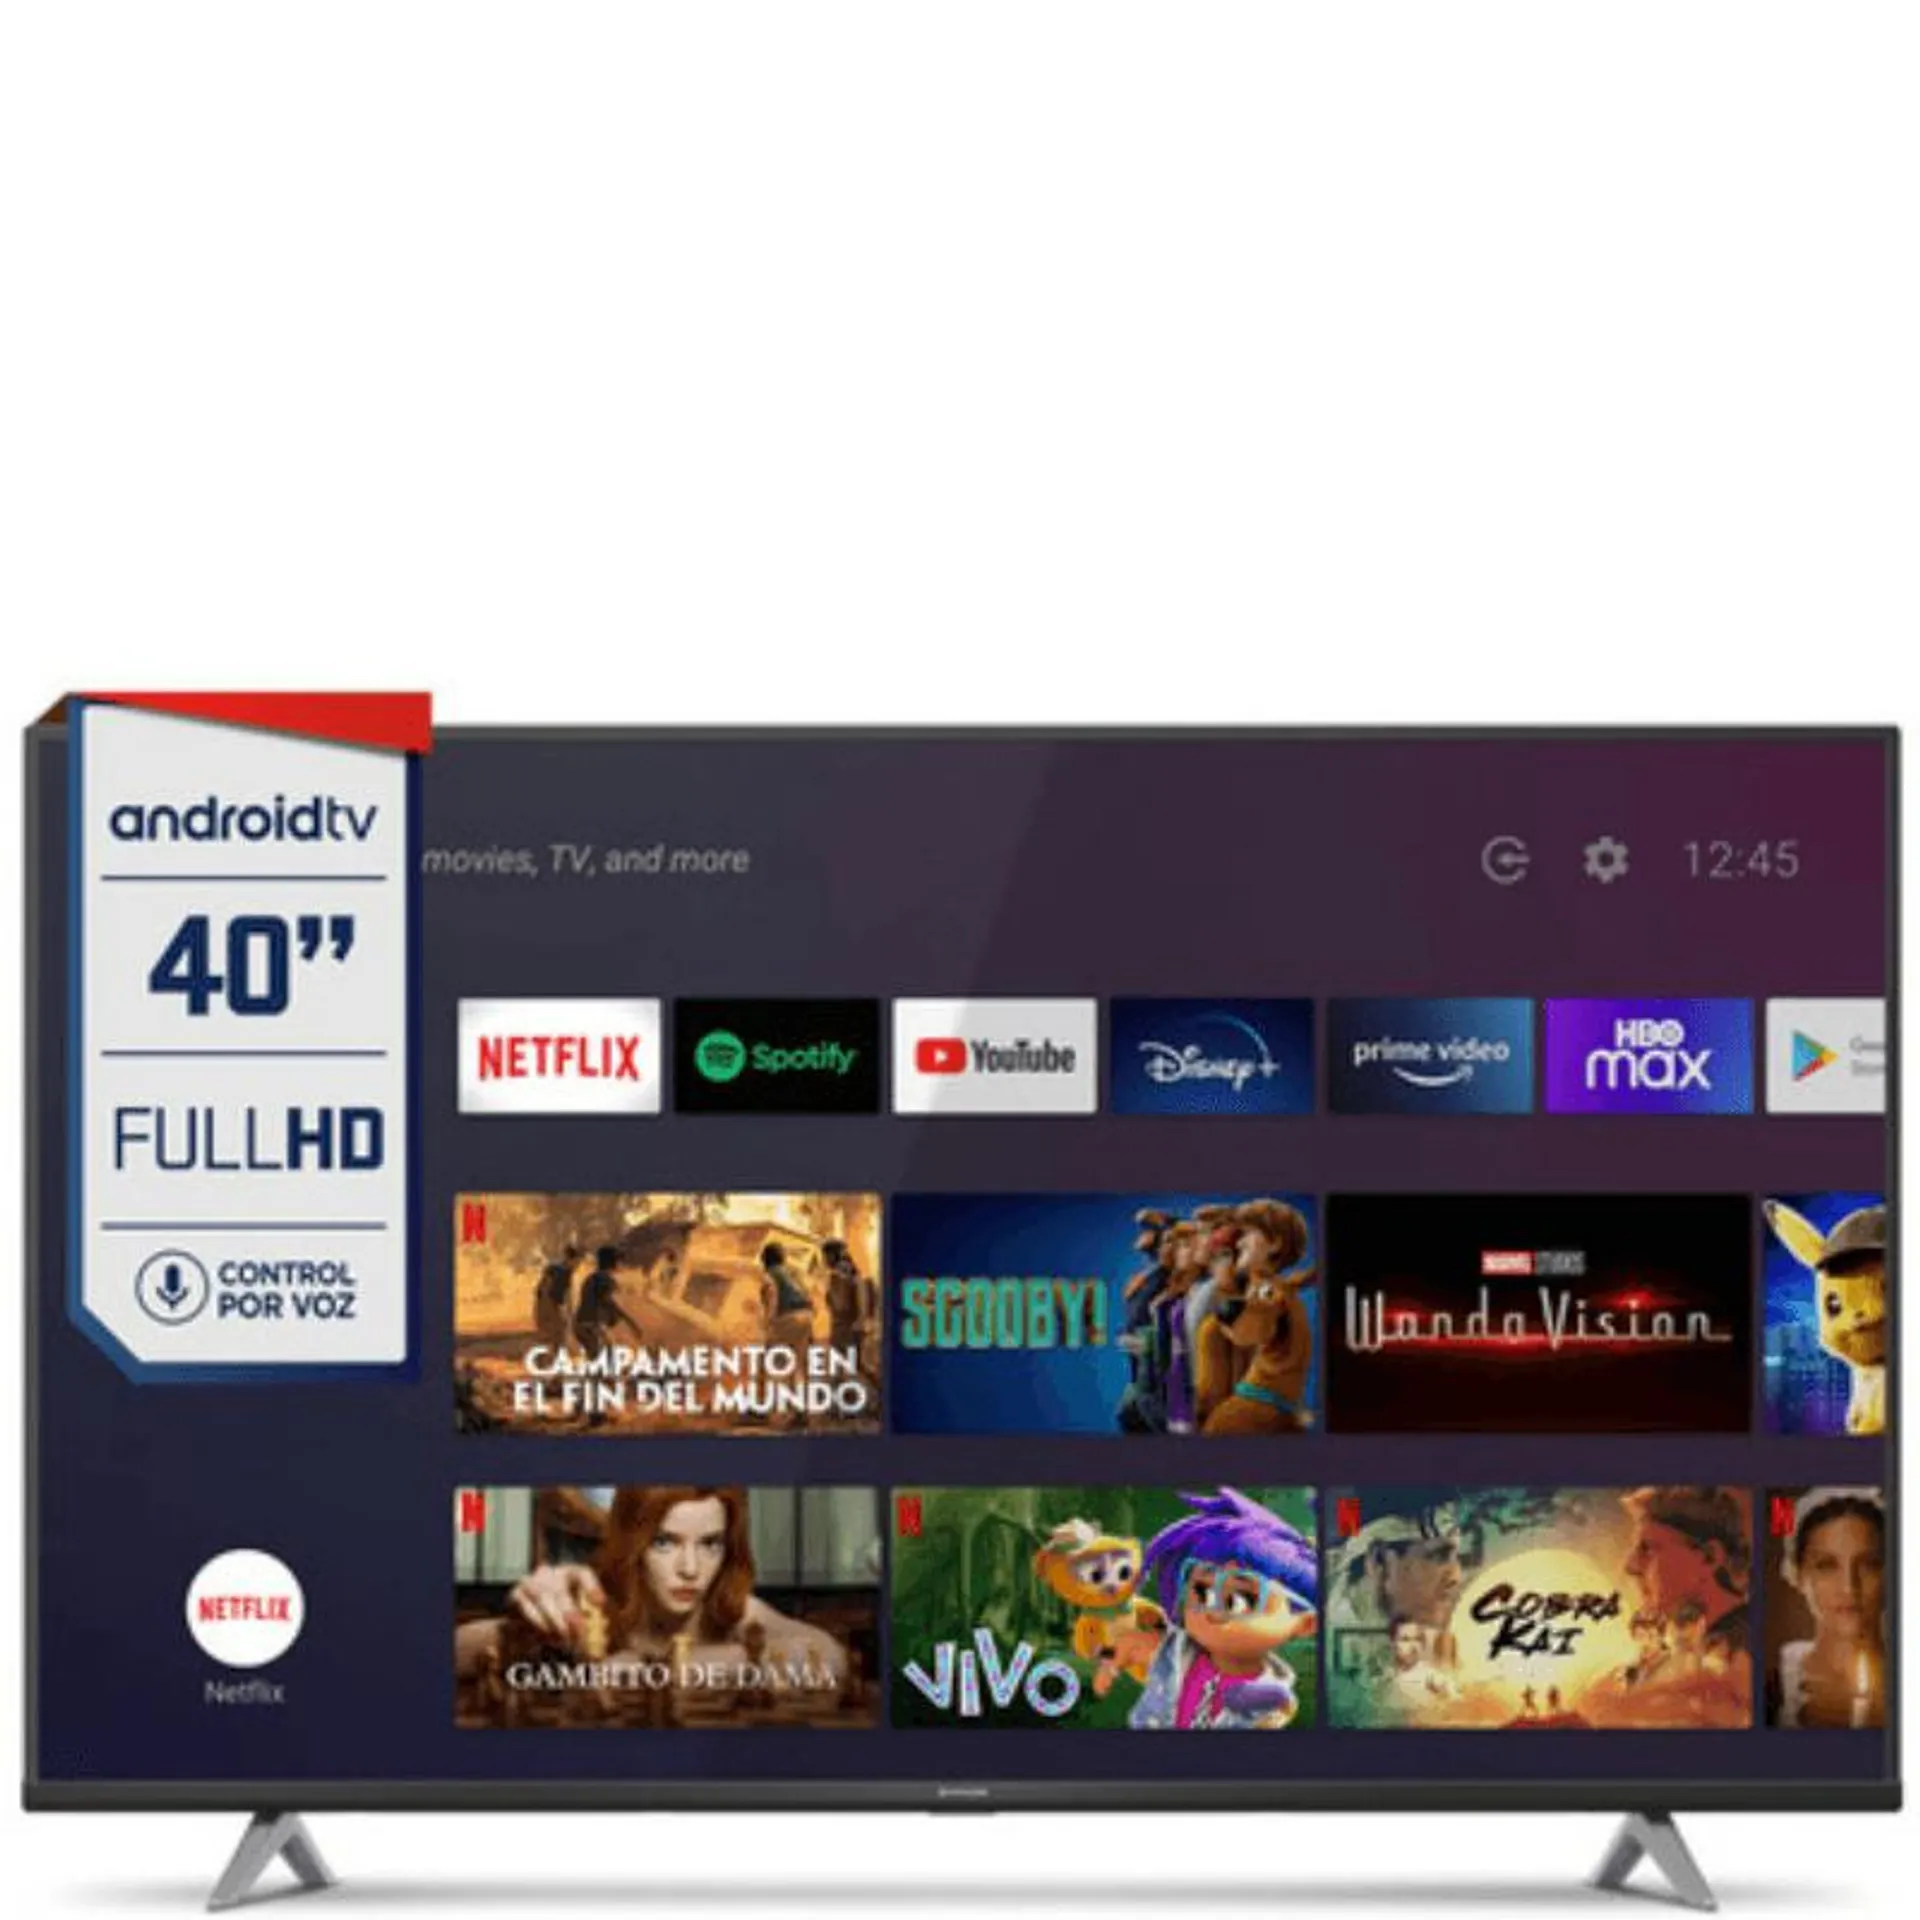 ANDROID TV 40" FULL HD LE40SMART21